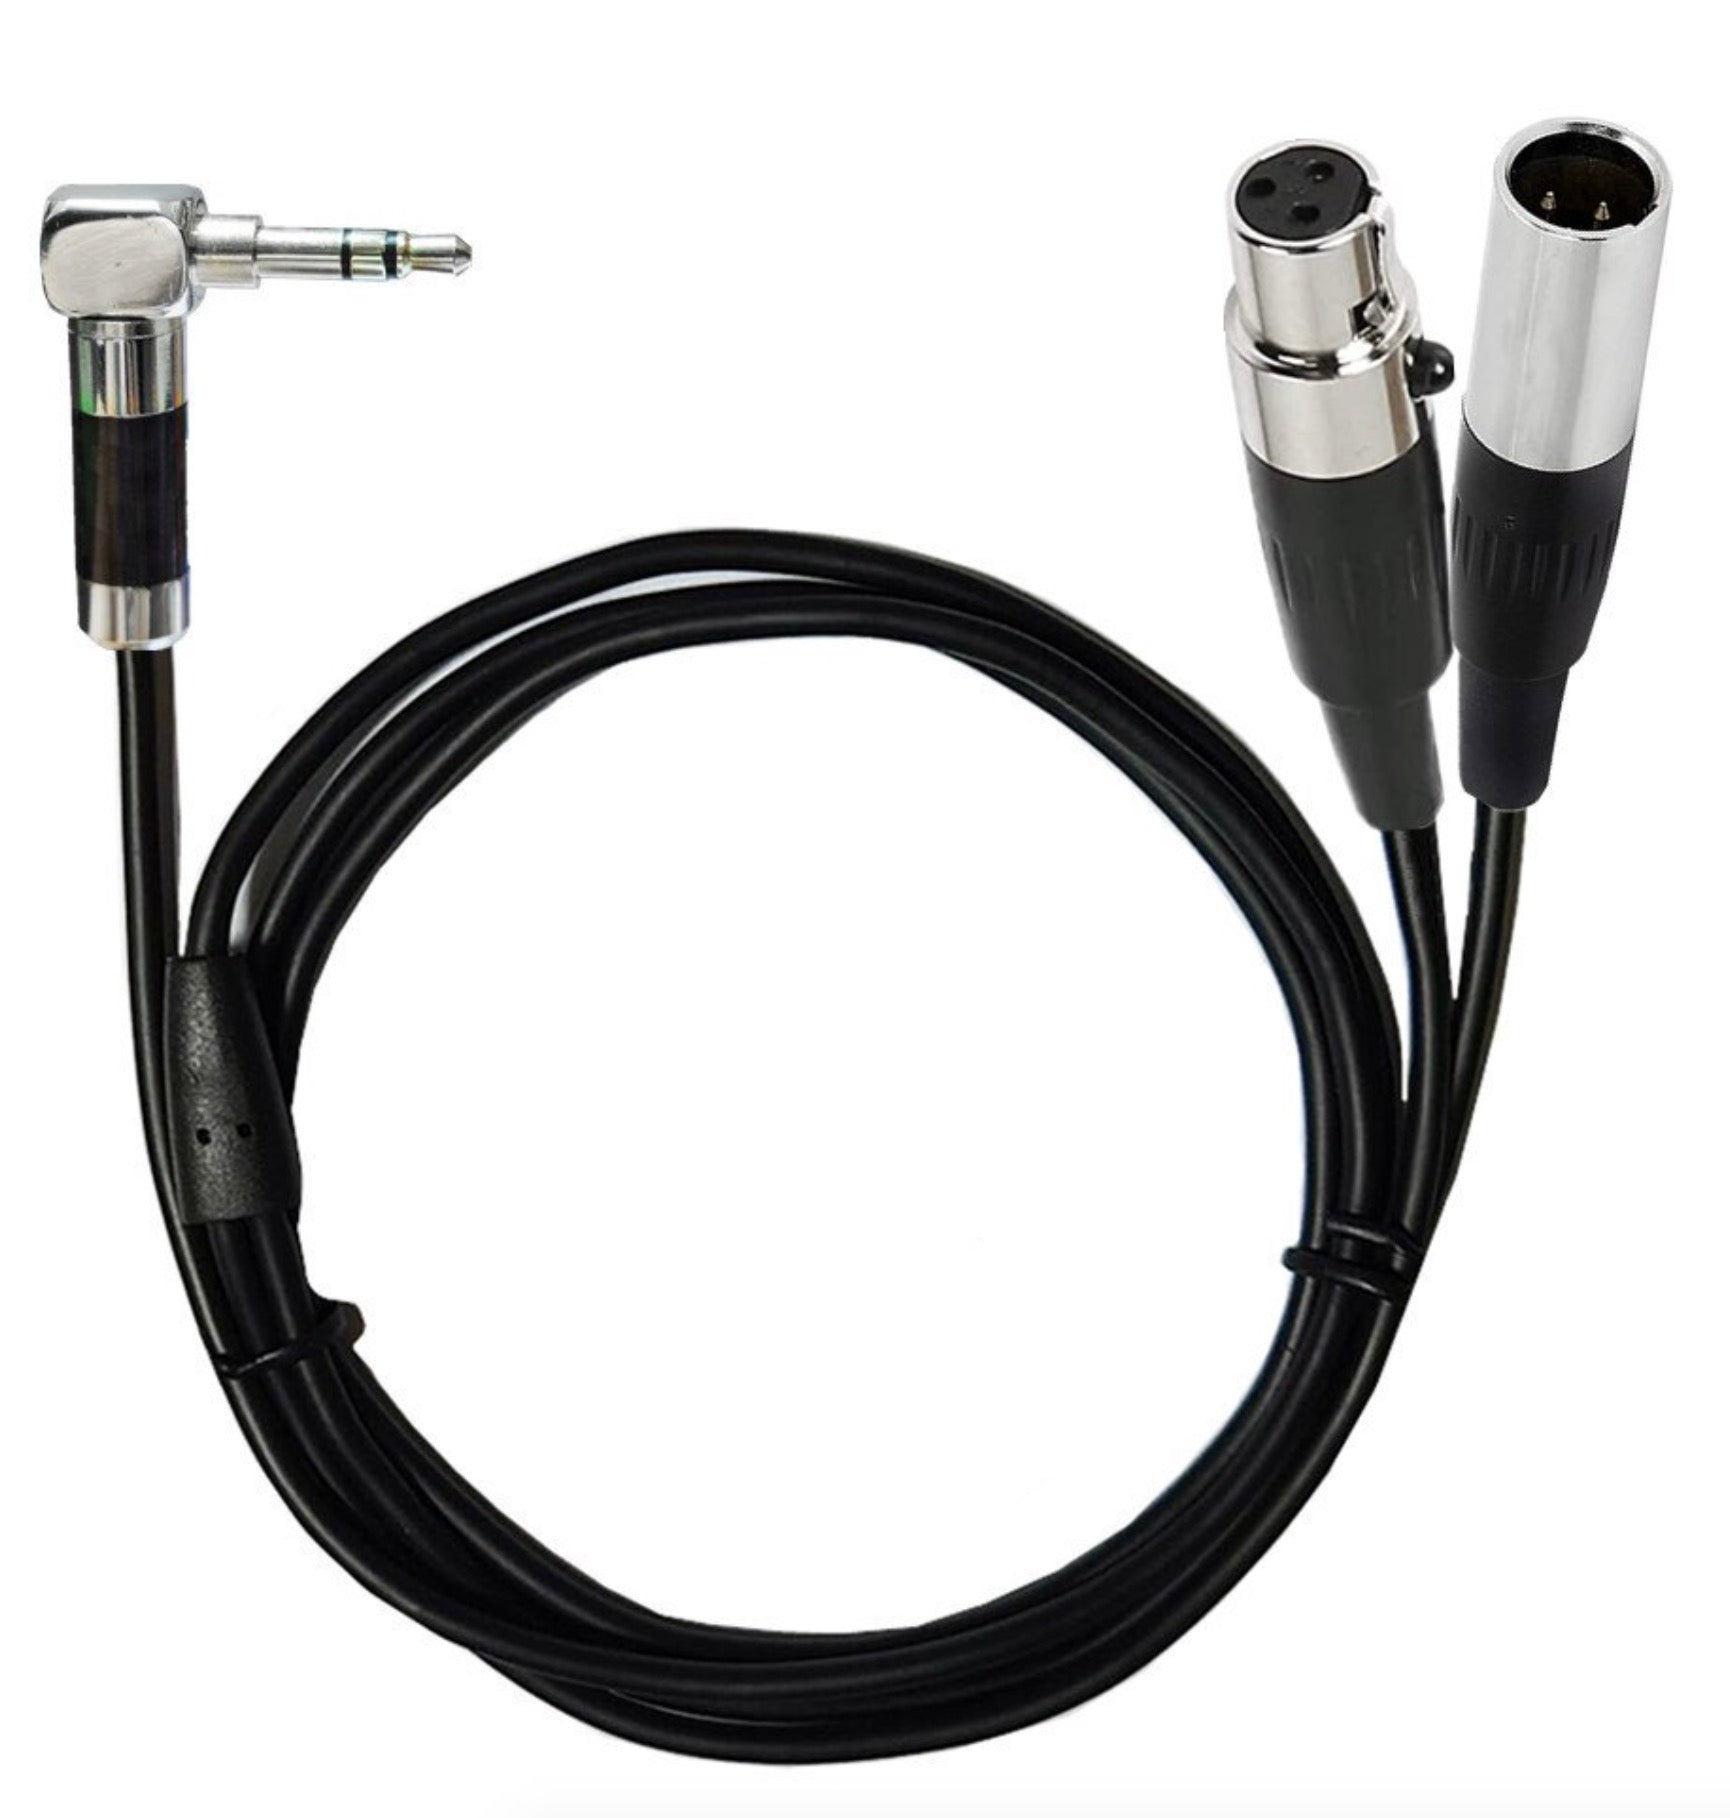 Mini 3-pin XLR Male + Female to 3.5mm 1/8" TRS Male Audio Cable